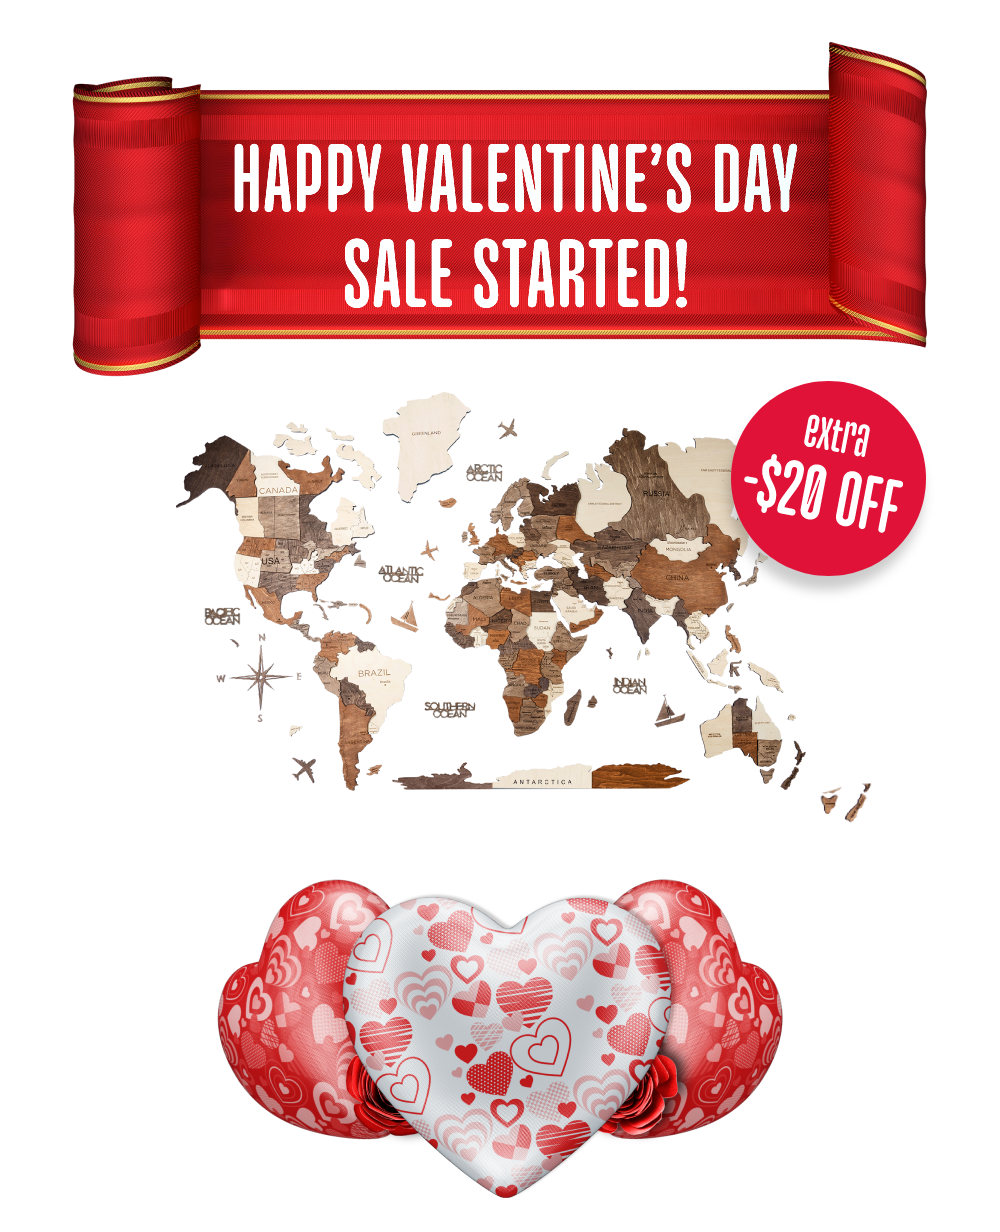 Give Your Sweetheart a Gift of Love!  